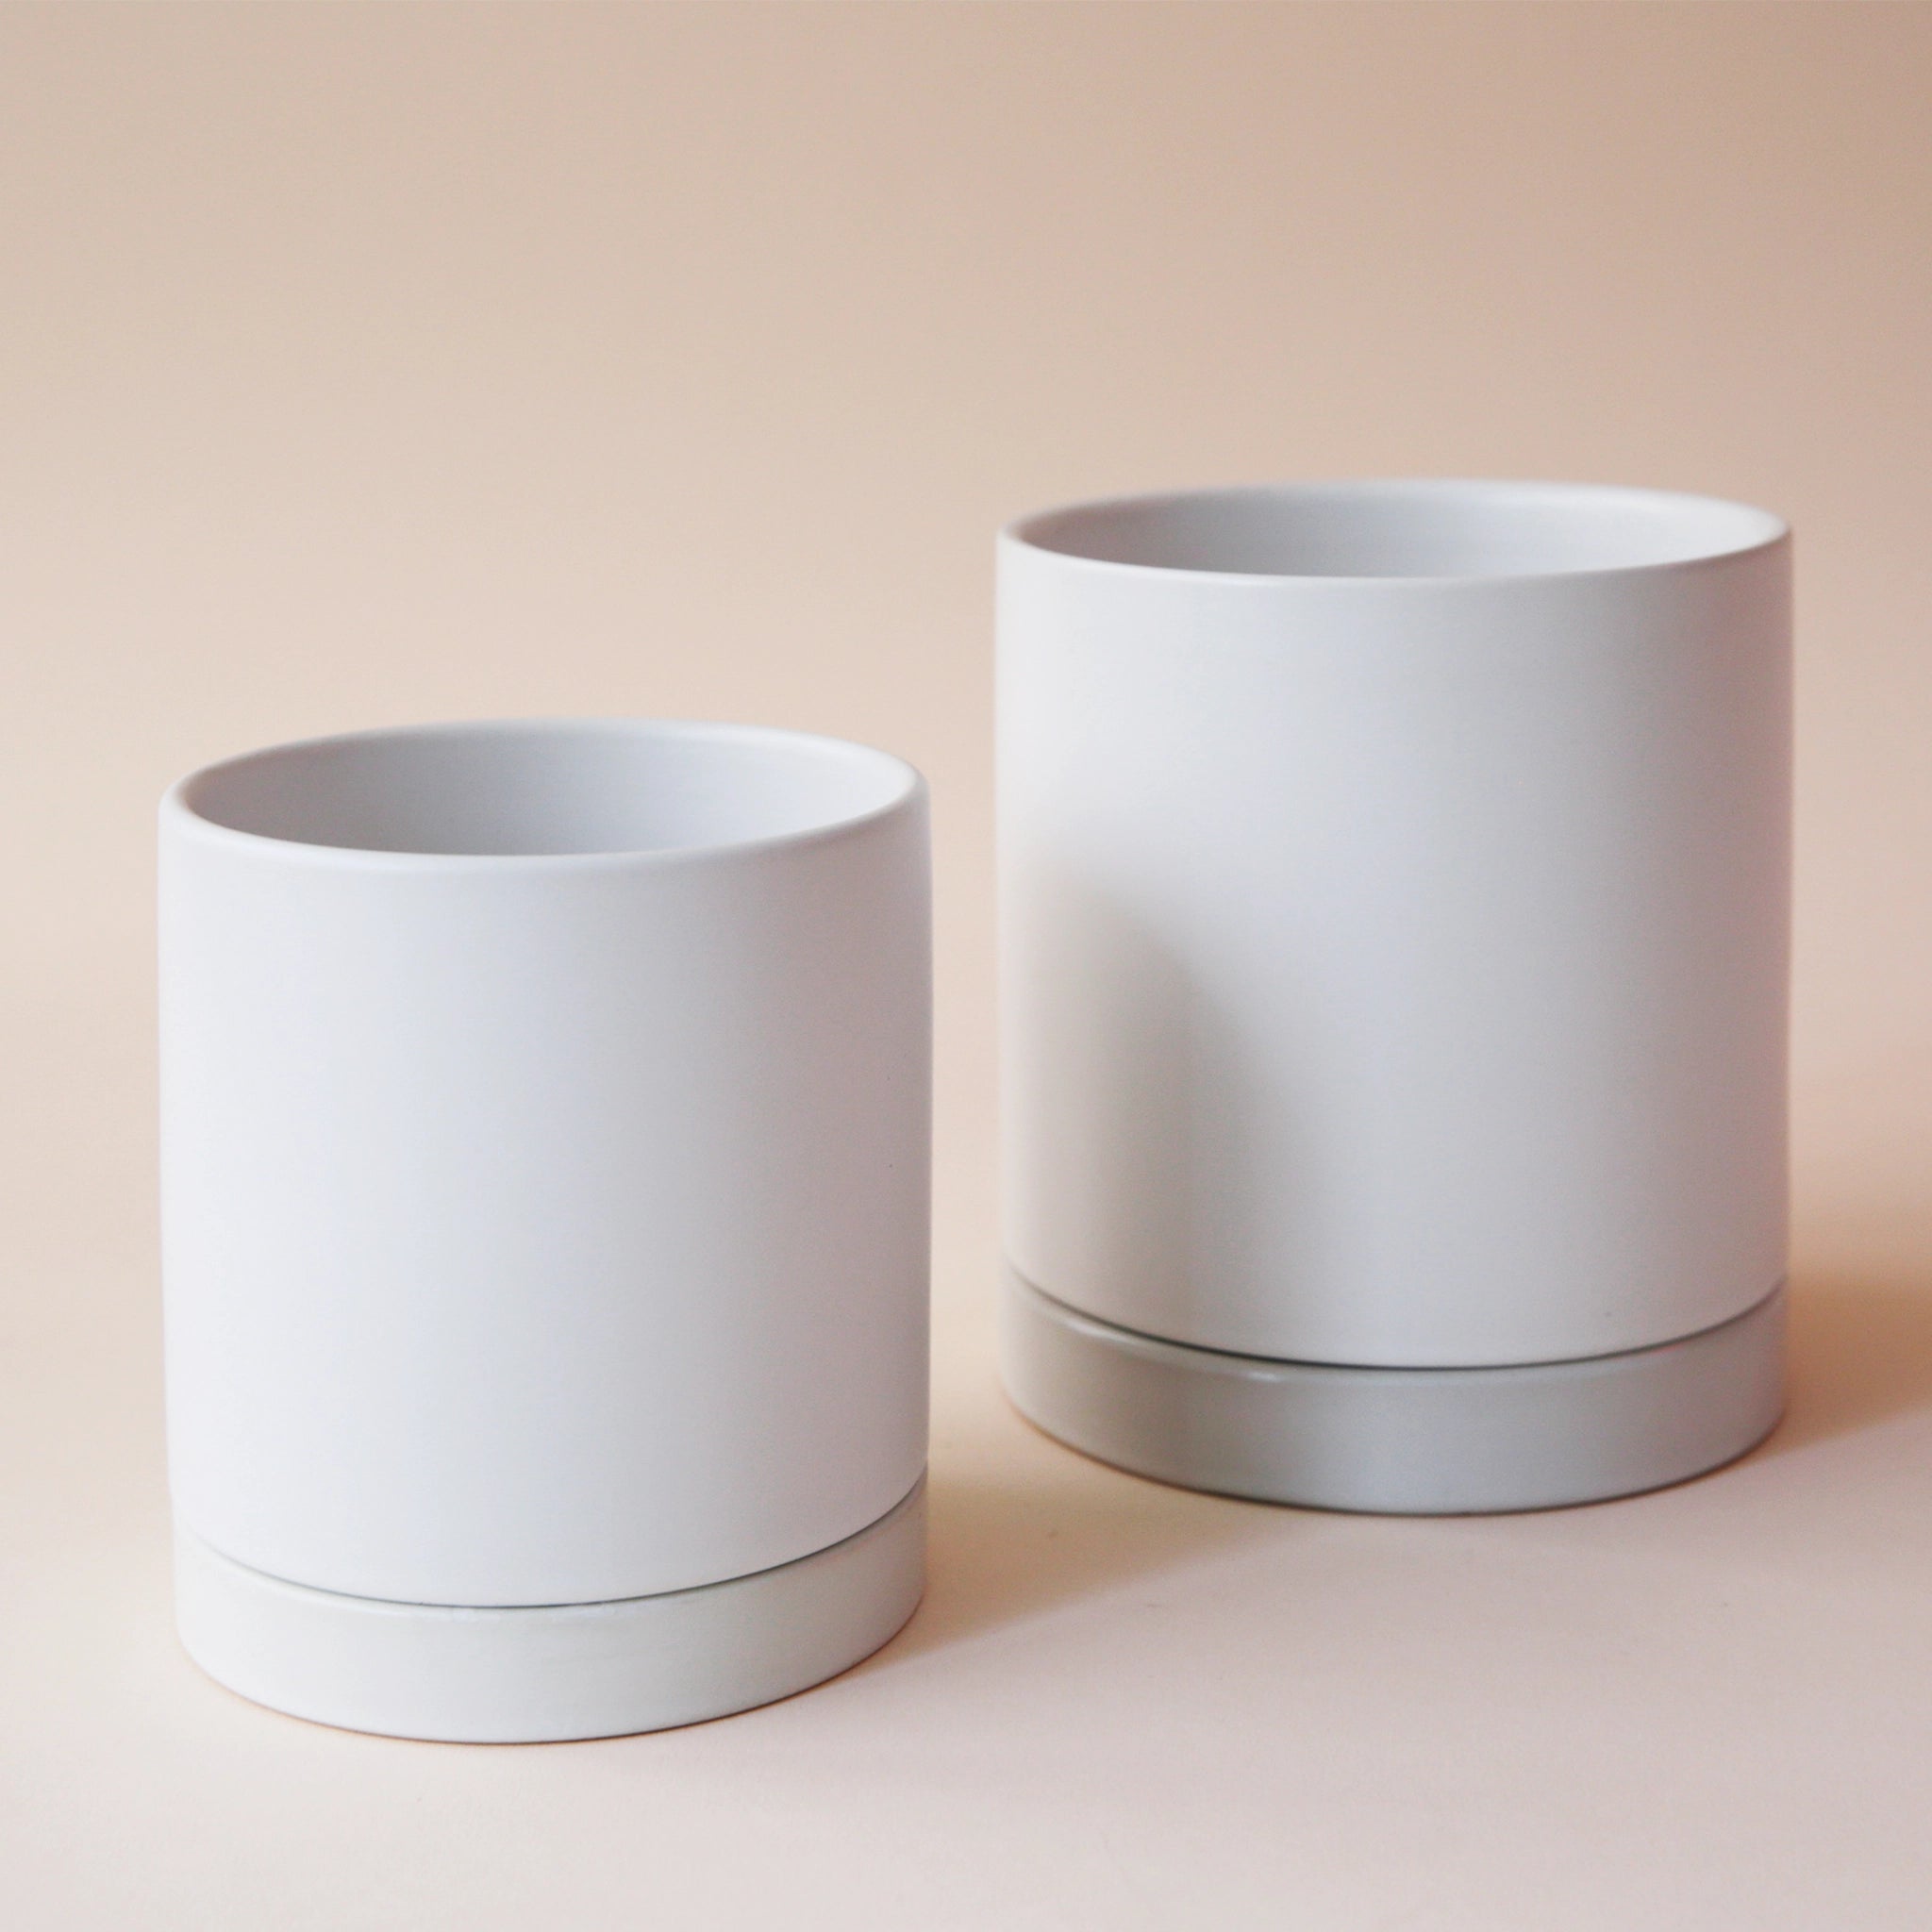 two simple white pots with matching saucers sit side by side on a pink ground